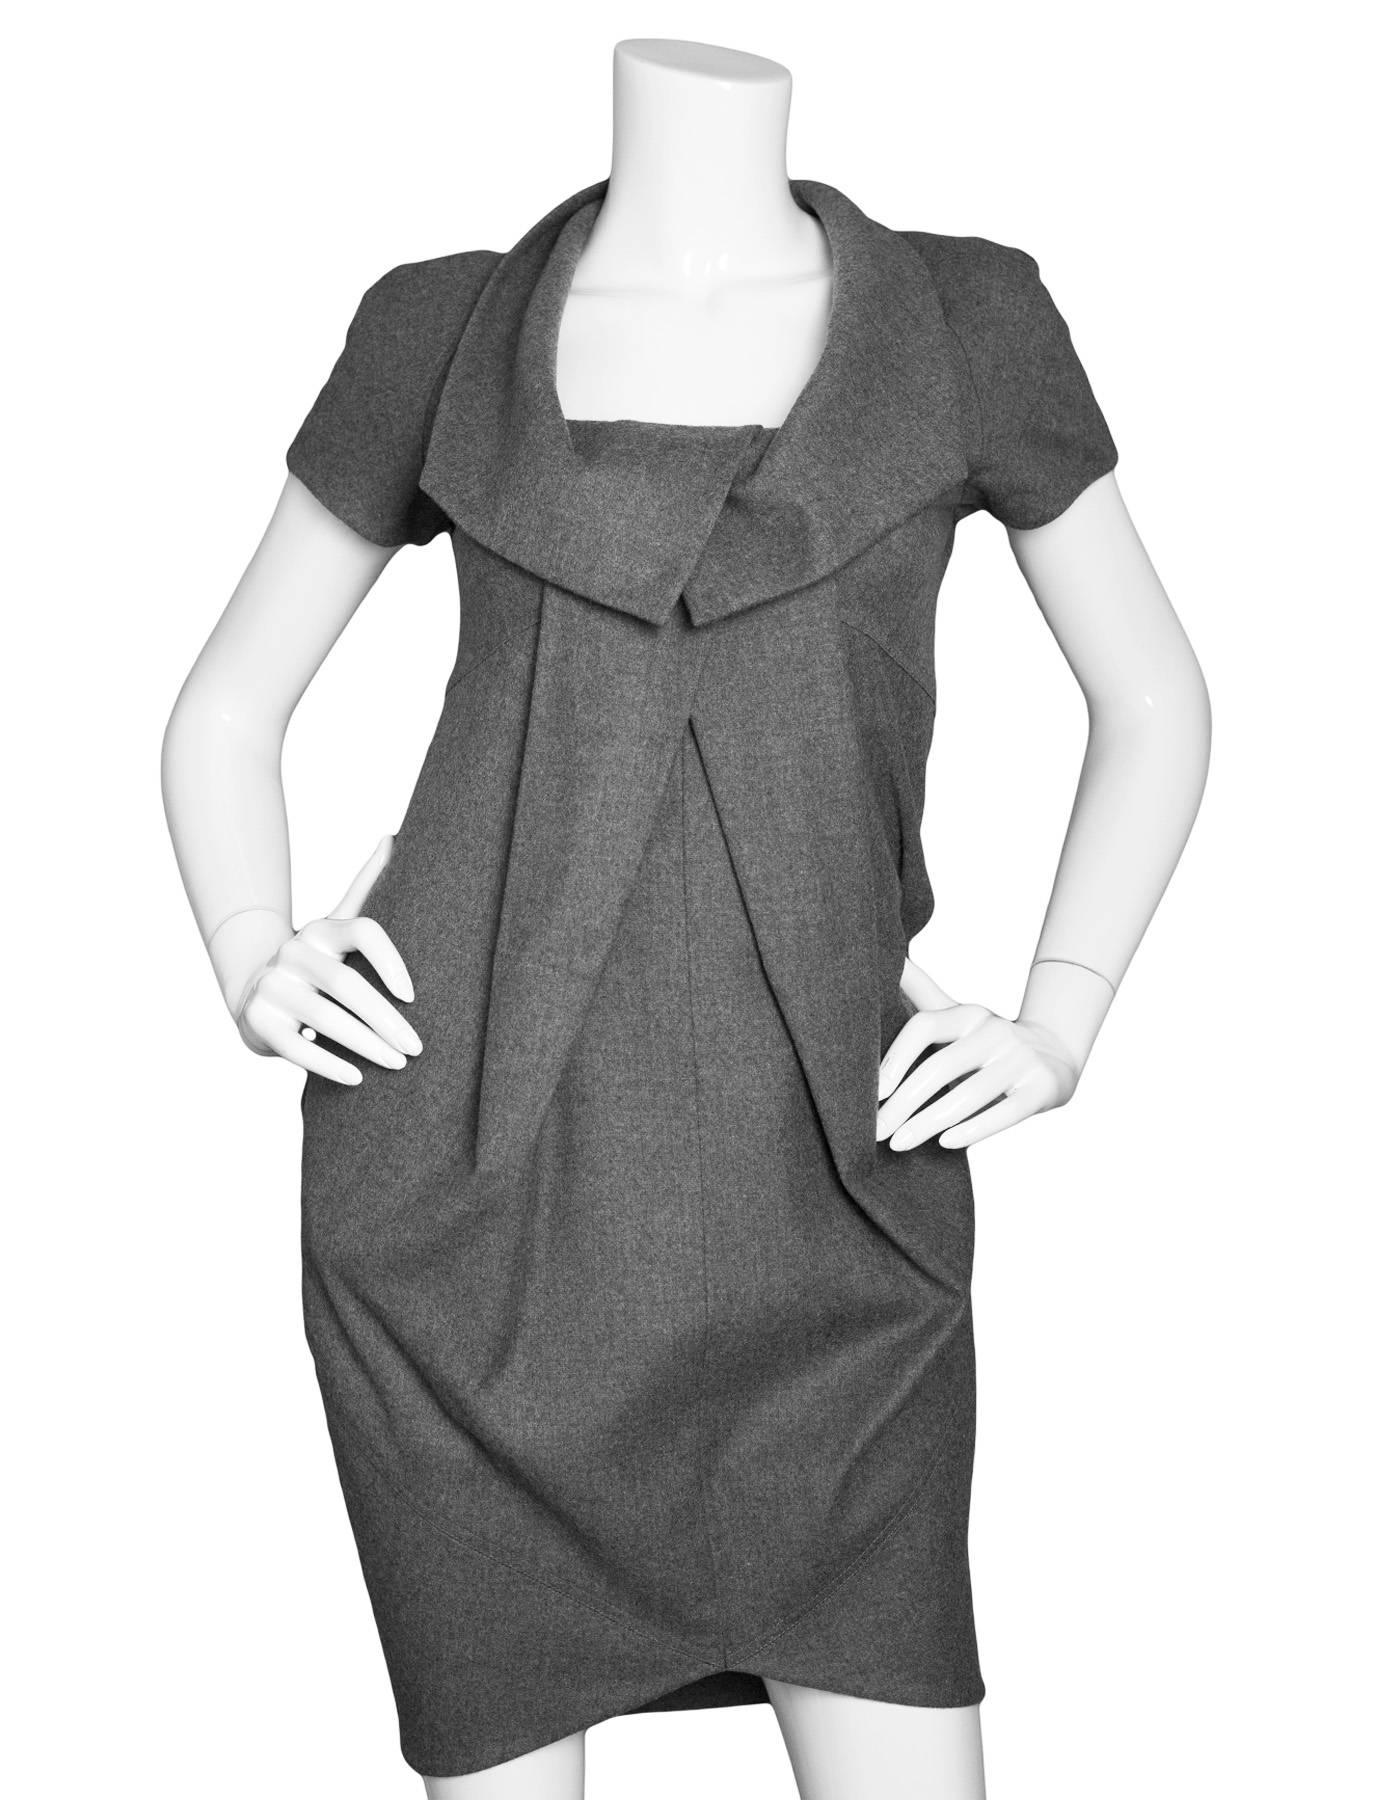 Fendi Grey Wool Pleated Dress Sz IT36

Made In: Italy
Color: Grey
Composition: 95% Fleecewool, 3% nylon, 2% elastane
Closure/Opening: Back zip closure
Exterior Pockets: None
Overall Condition: Excellent pre-owned condition 
Marked Size: IT36/